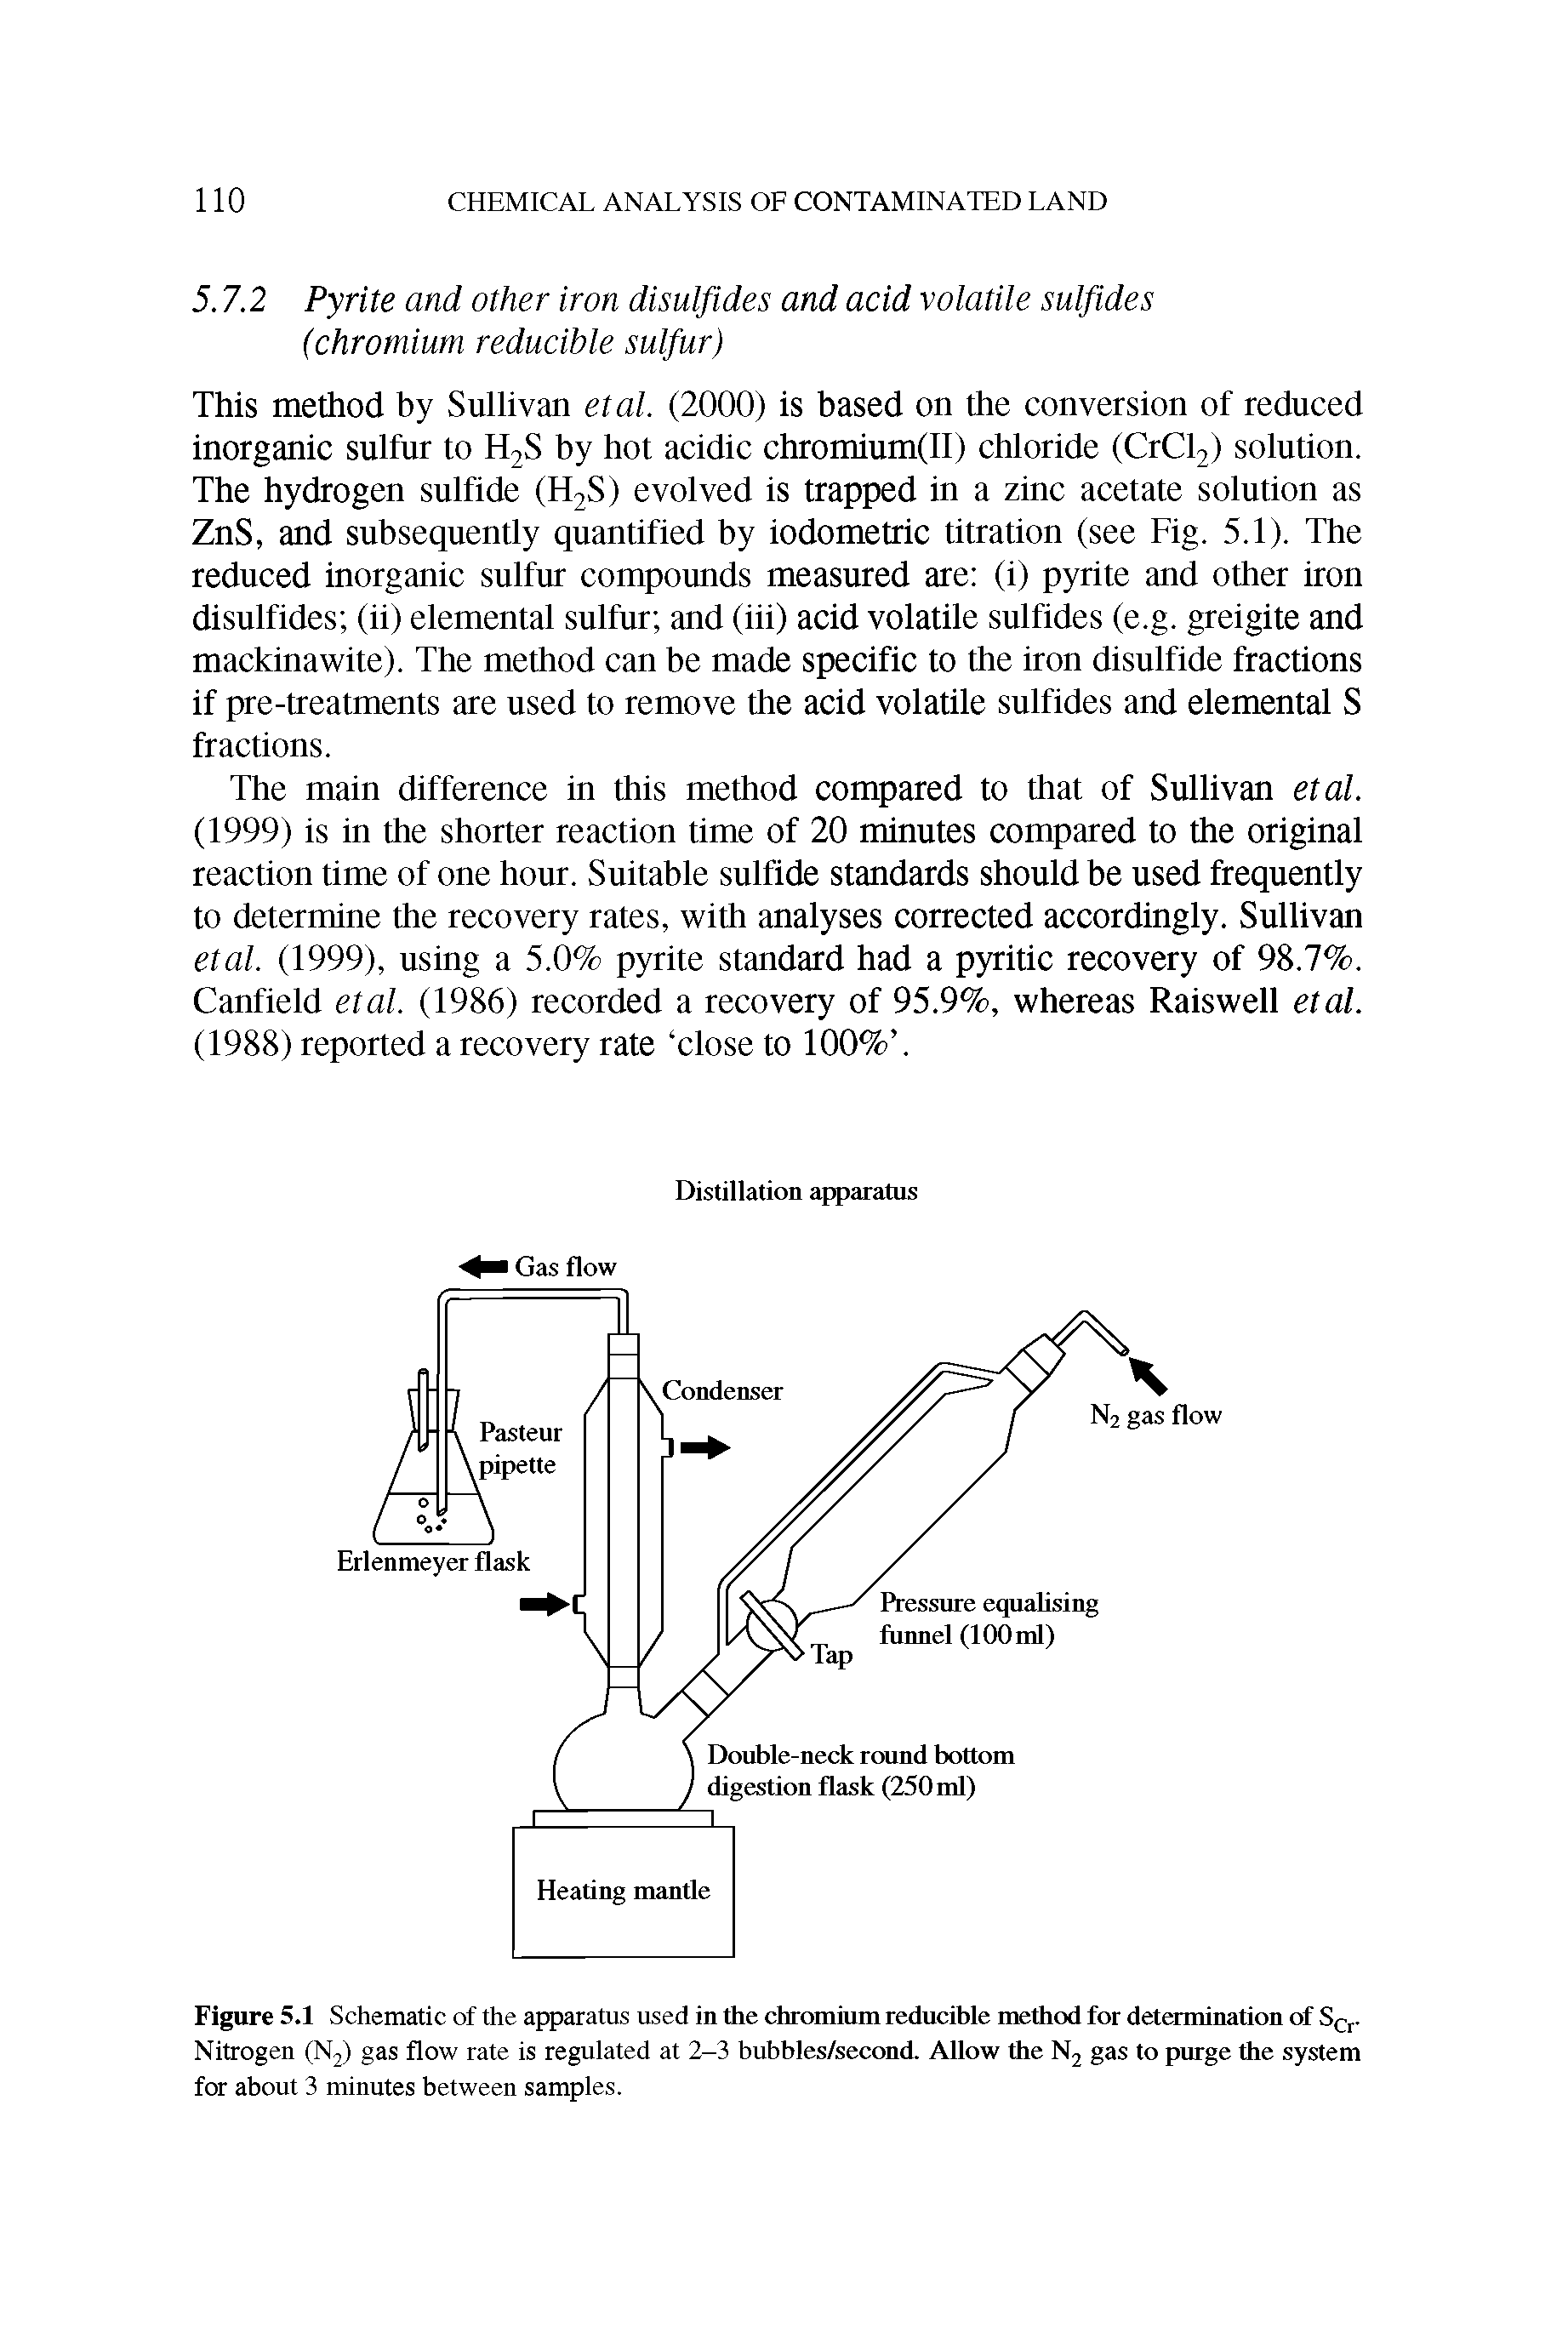 Figure 5.1 Schematic of the apparatus used in the chromium reducible method for determination of SCr. Nitrogen (N2) gas flow rate is regulated at 2-3 bubbles/second. Allow the N2 gas to purge the system for about 3 minutes between samples.